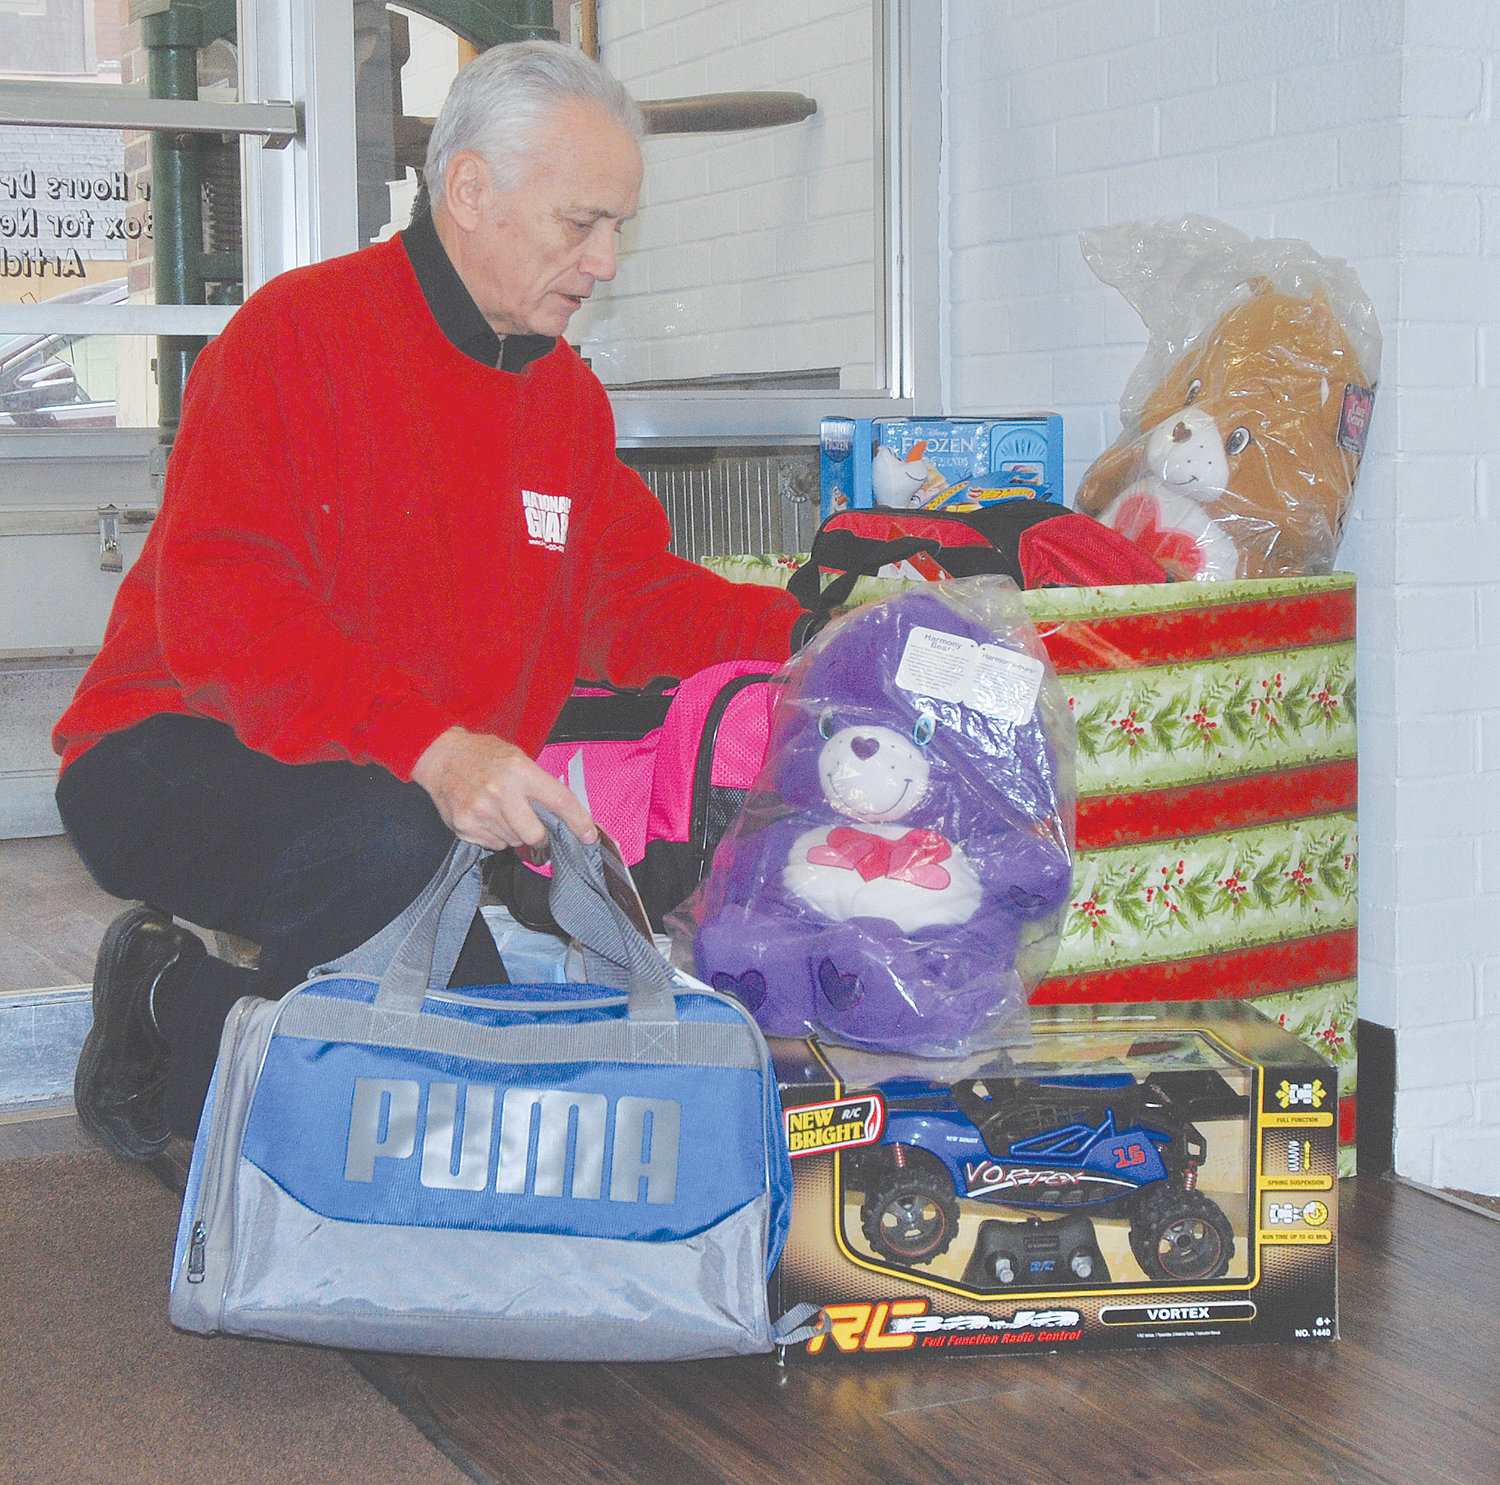 S. David Long picks up items donated at the Journal Review as part of the 26th annual Opeartion Toybox toy drive. Each year the Indiana National Guard and members of Delta Theta Tau sorority organize the drive to ensure as many children as possible wake up to at least one new toy under the tree on Christmas morning.